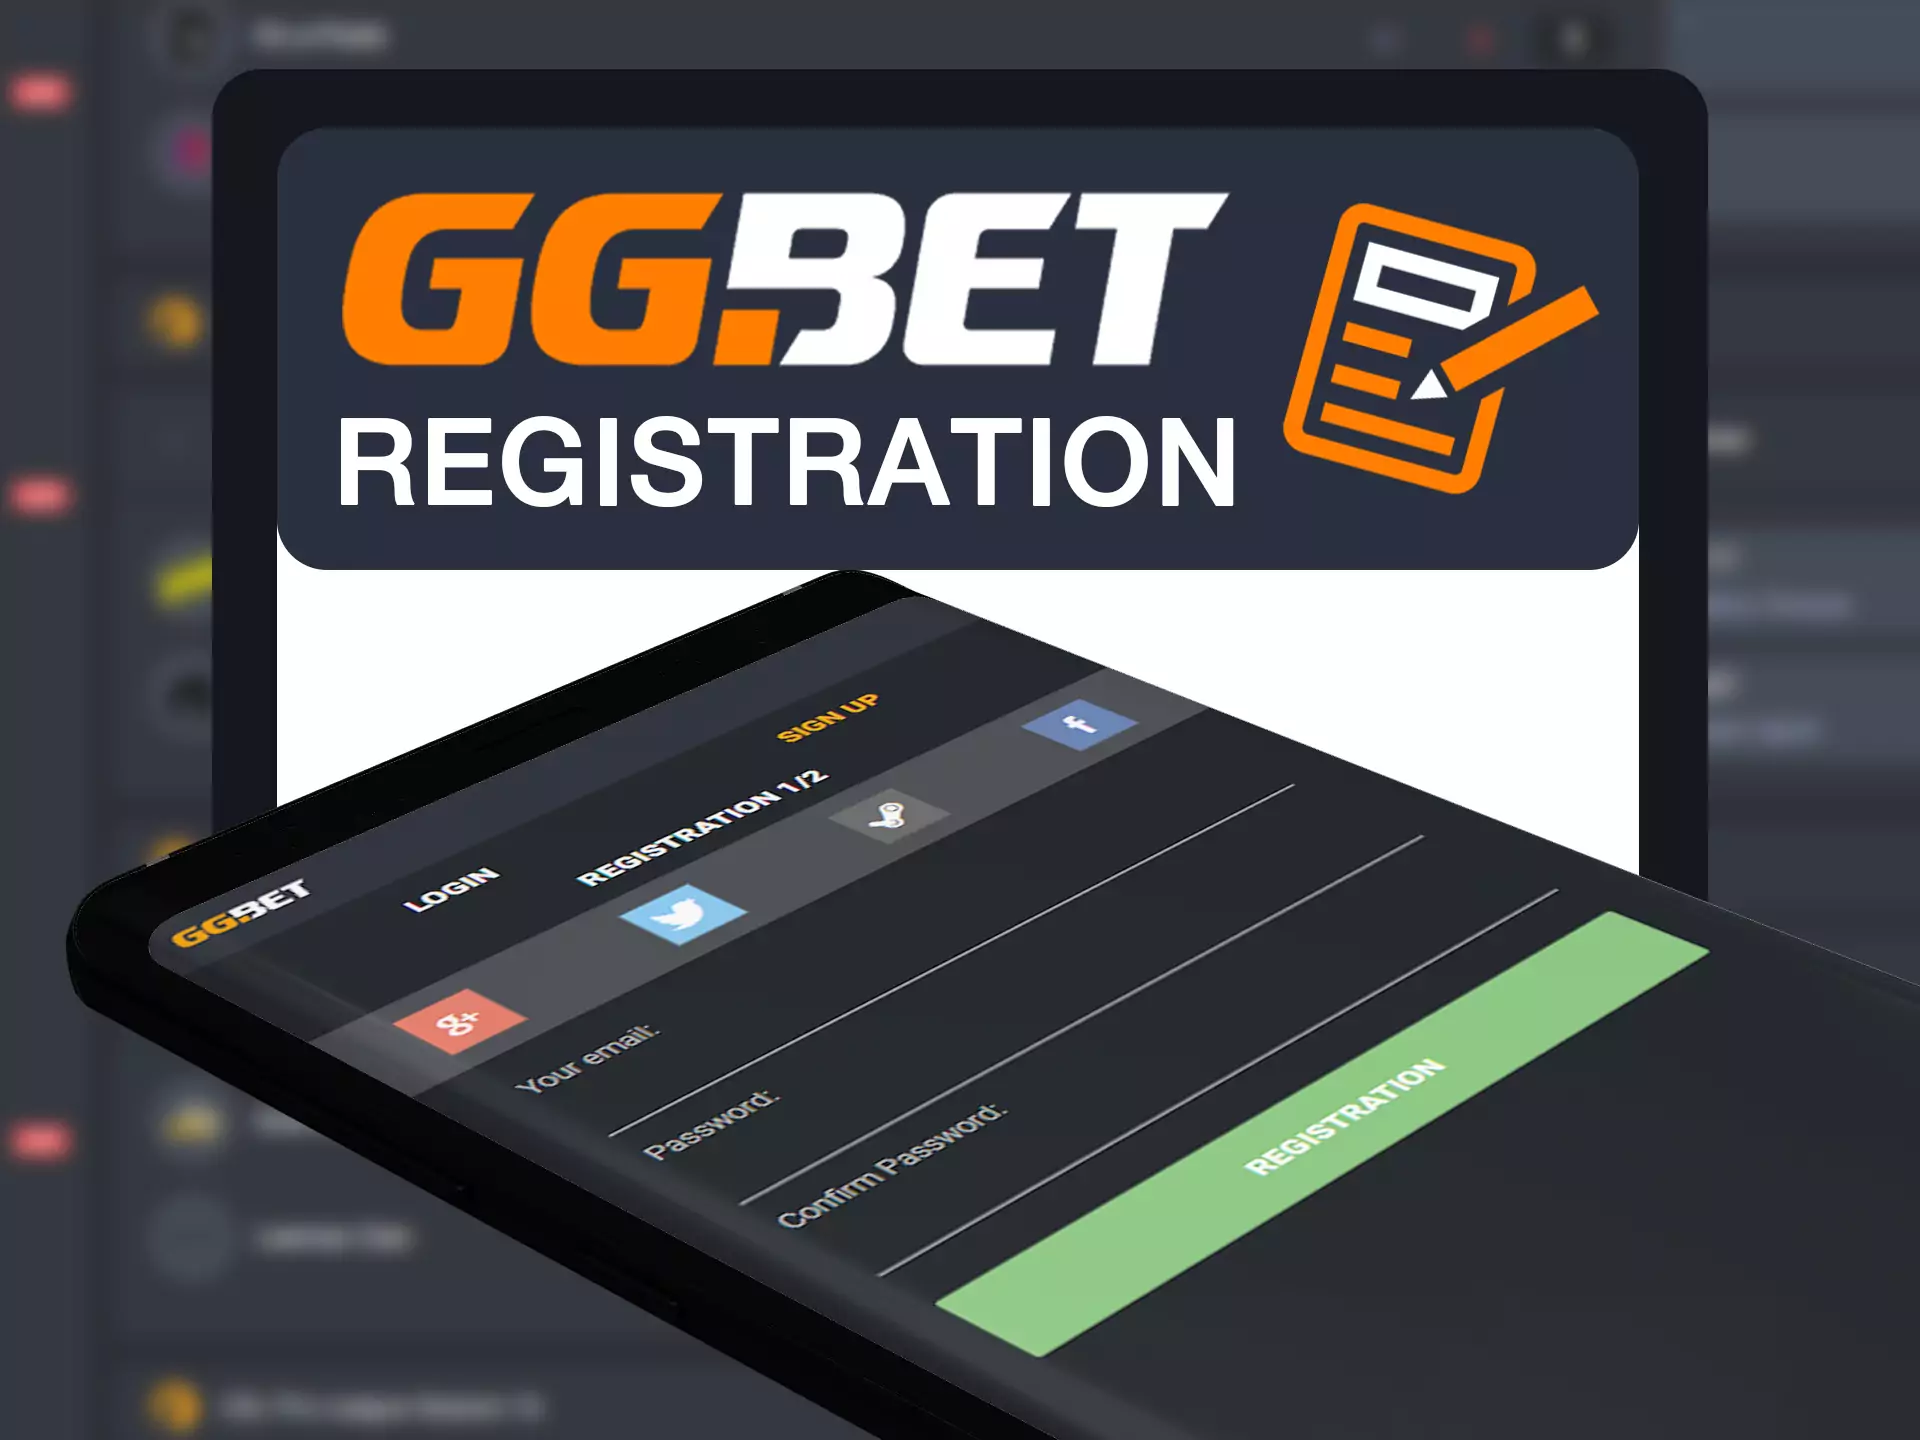 Registrate without difficulties using GGBet app.